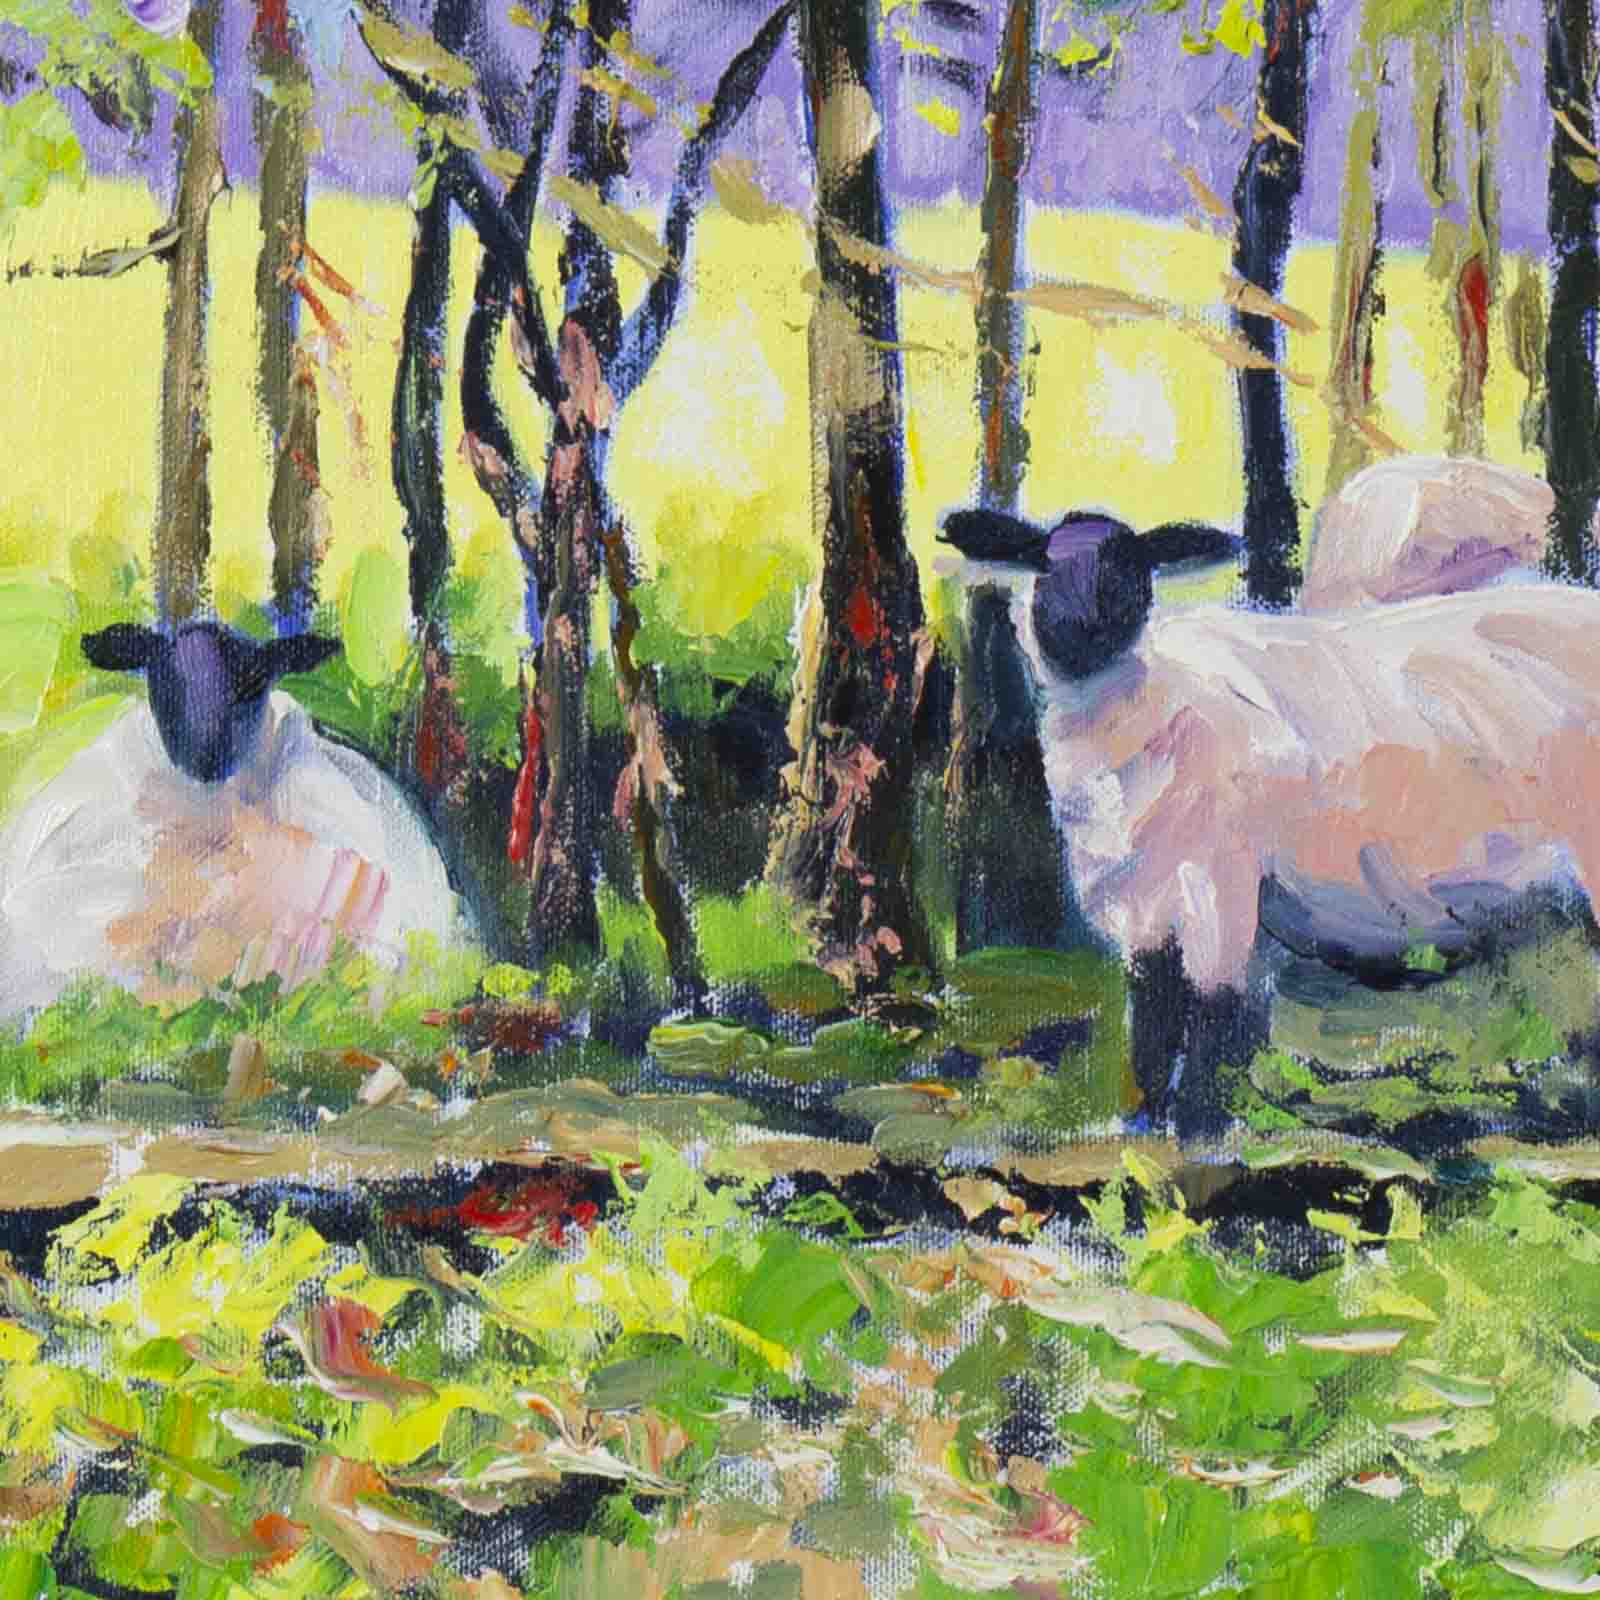 Sheep In The Glade